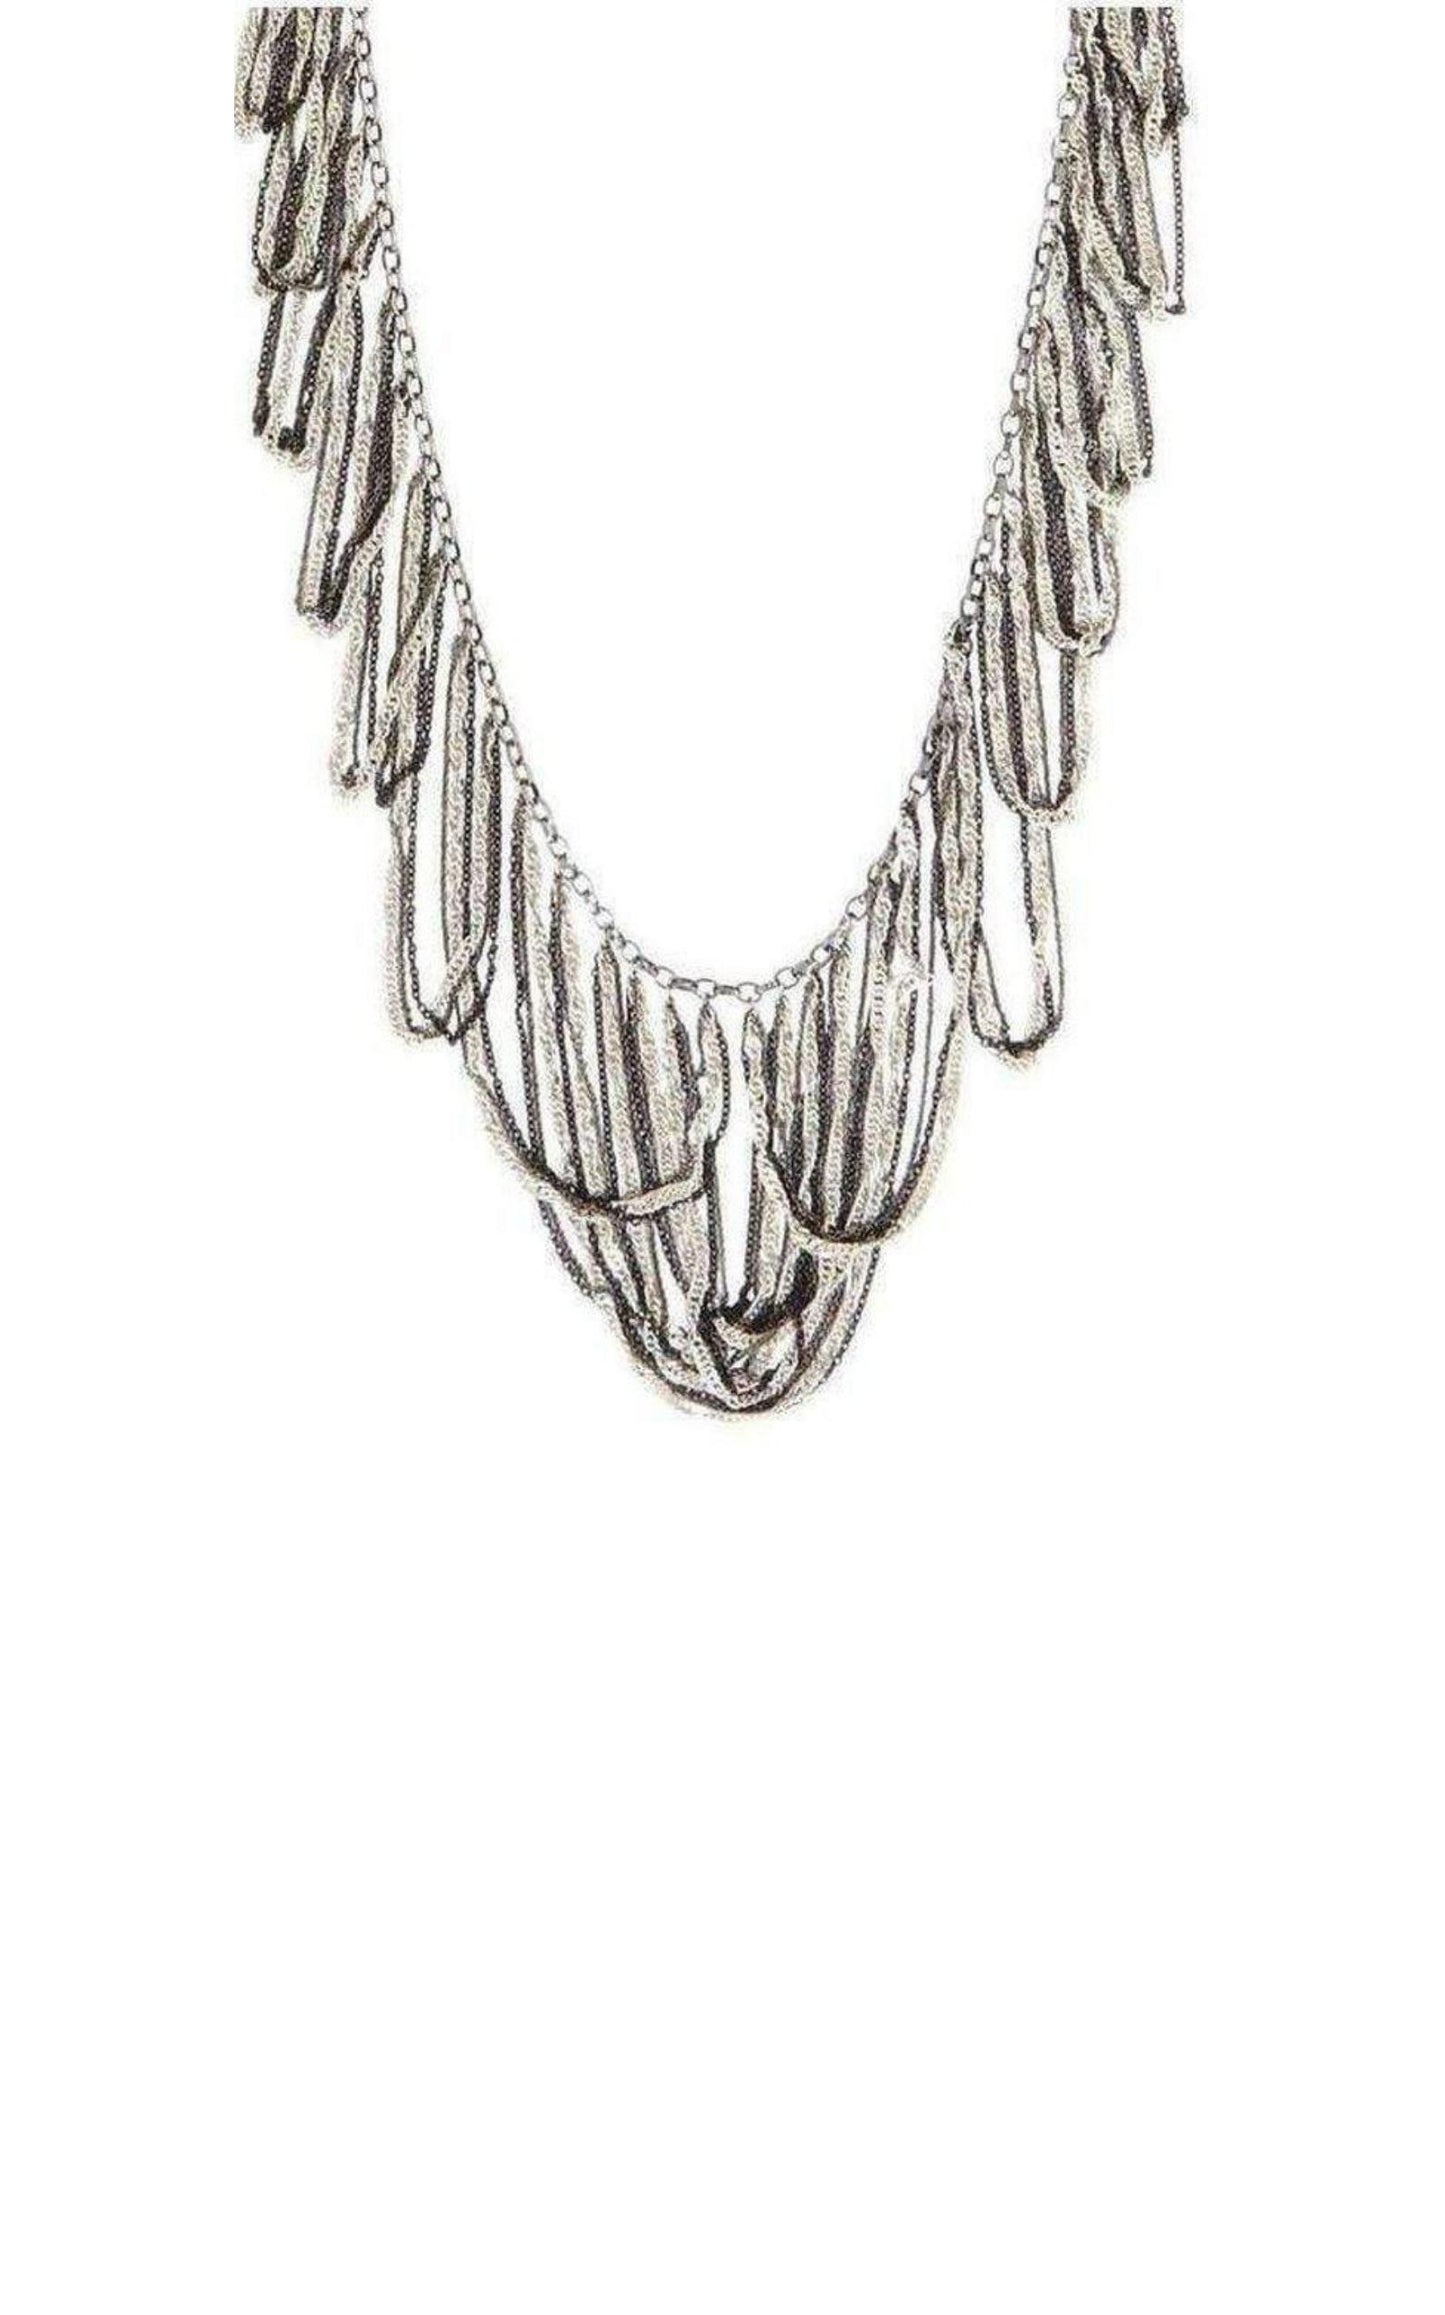  BCBGMAXAZRIALooped Chained Necklace - Runway Catalog